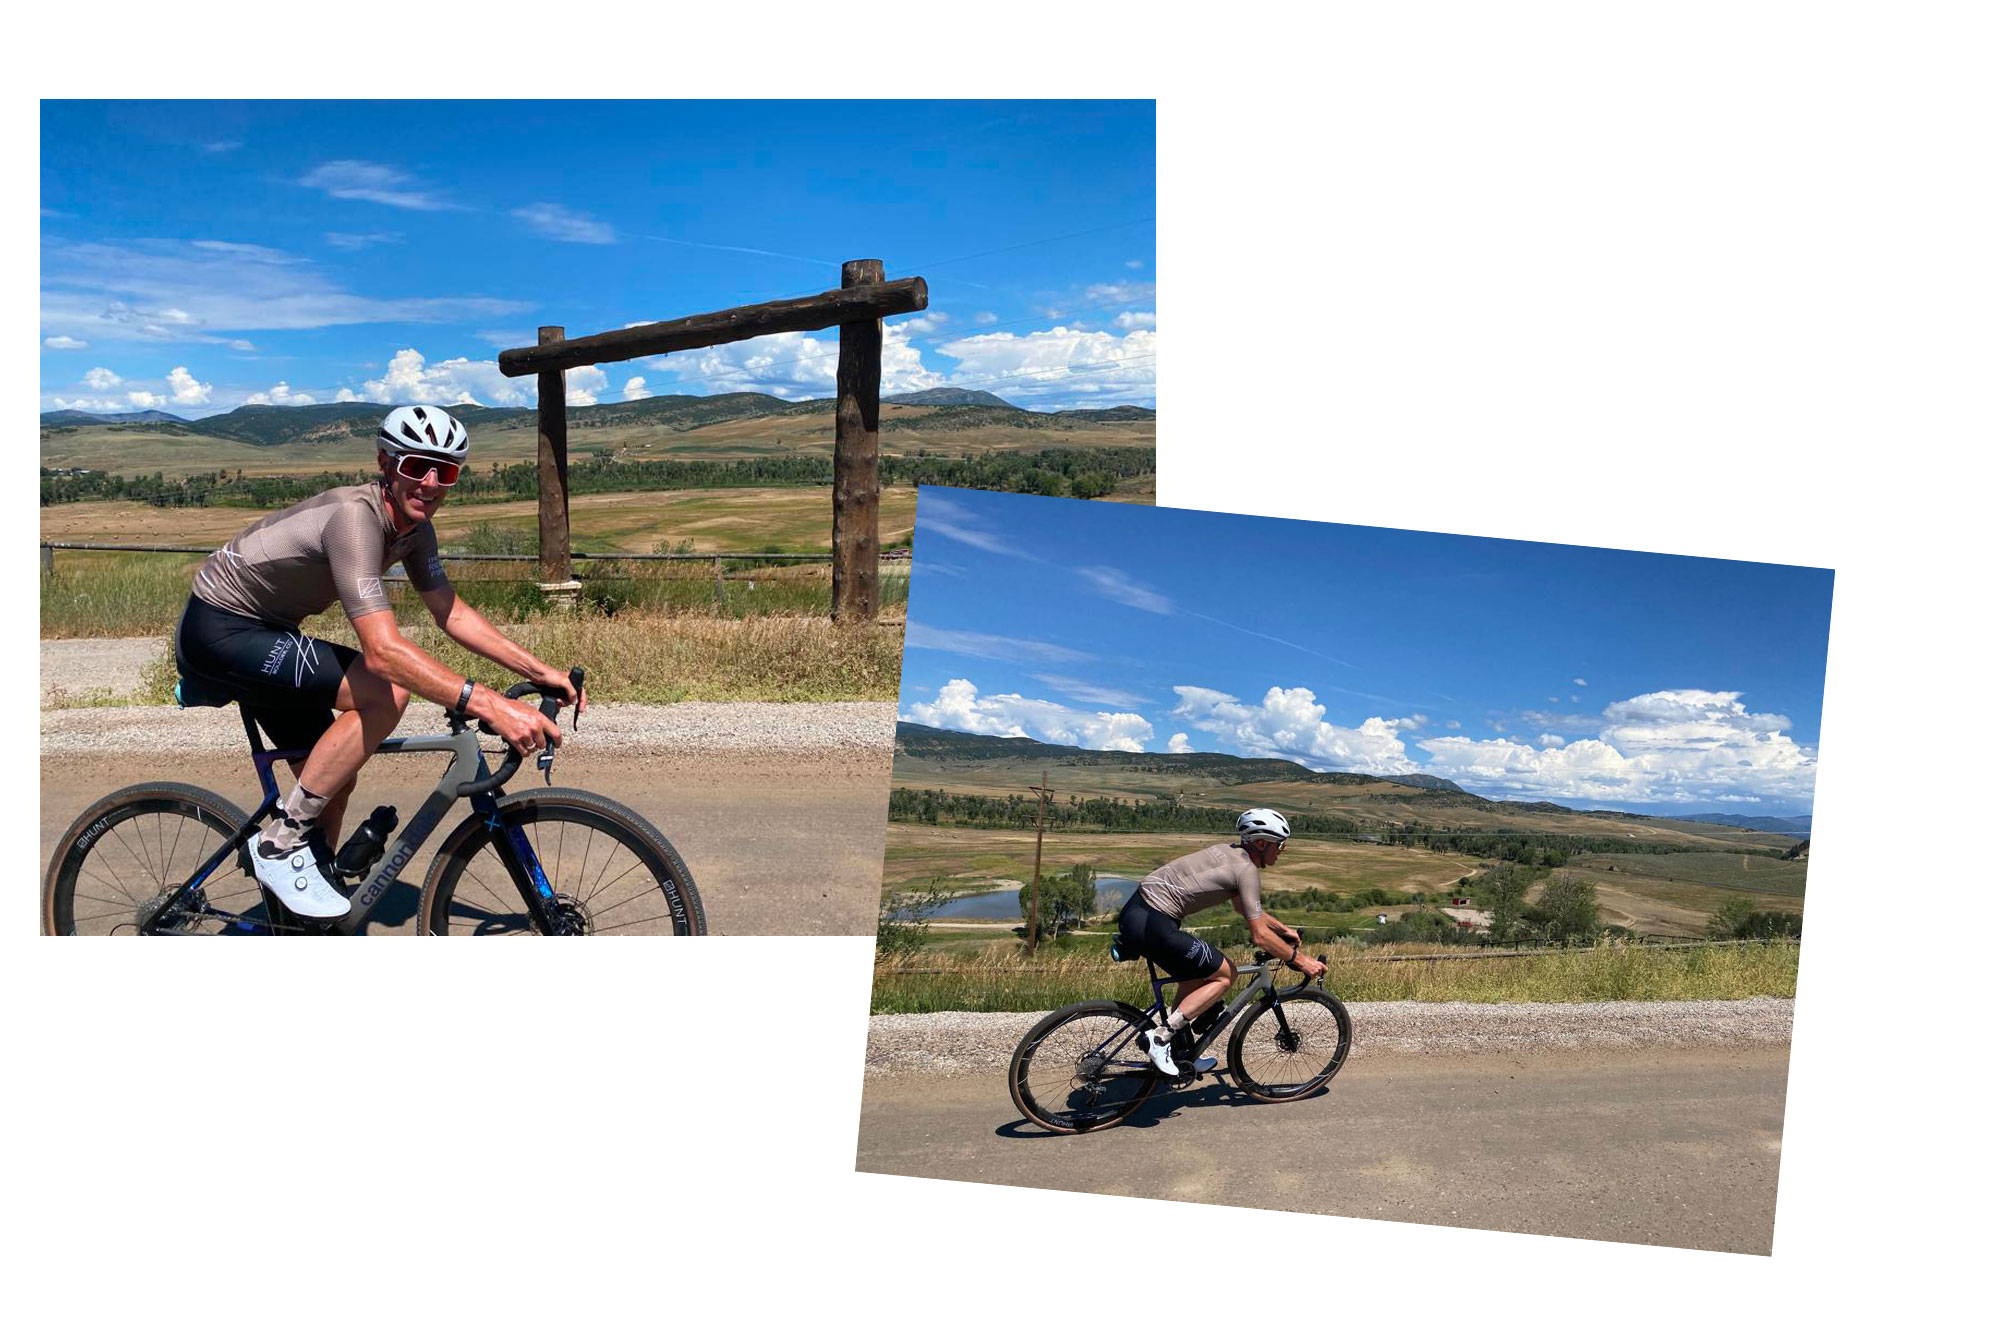 Photos of Simon riding in Steamboat springs